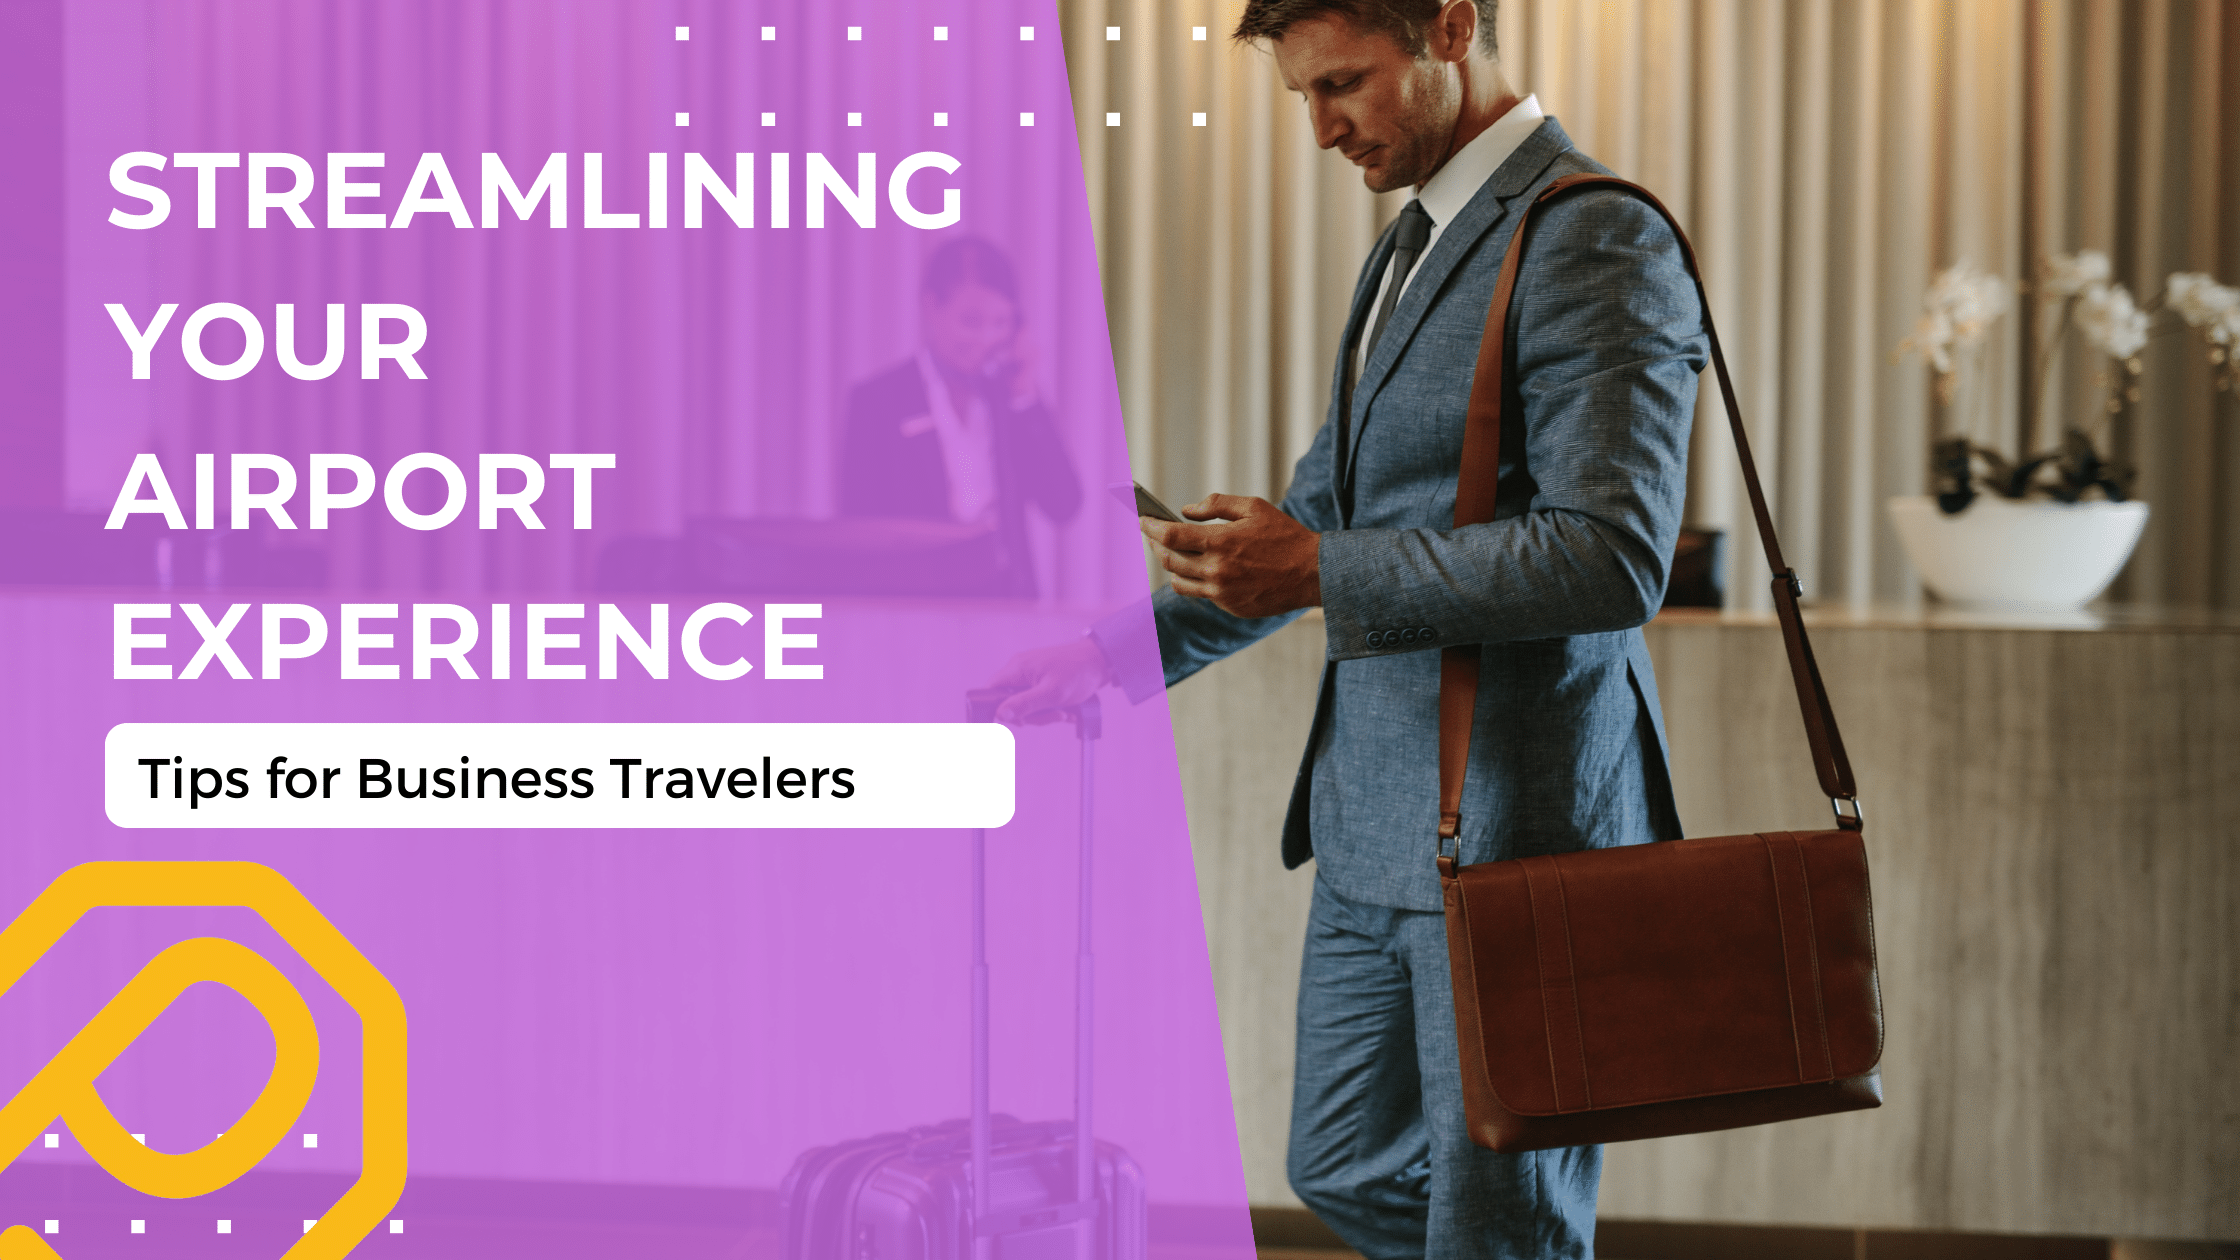 Airport tips for business travelers